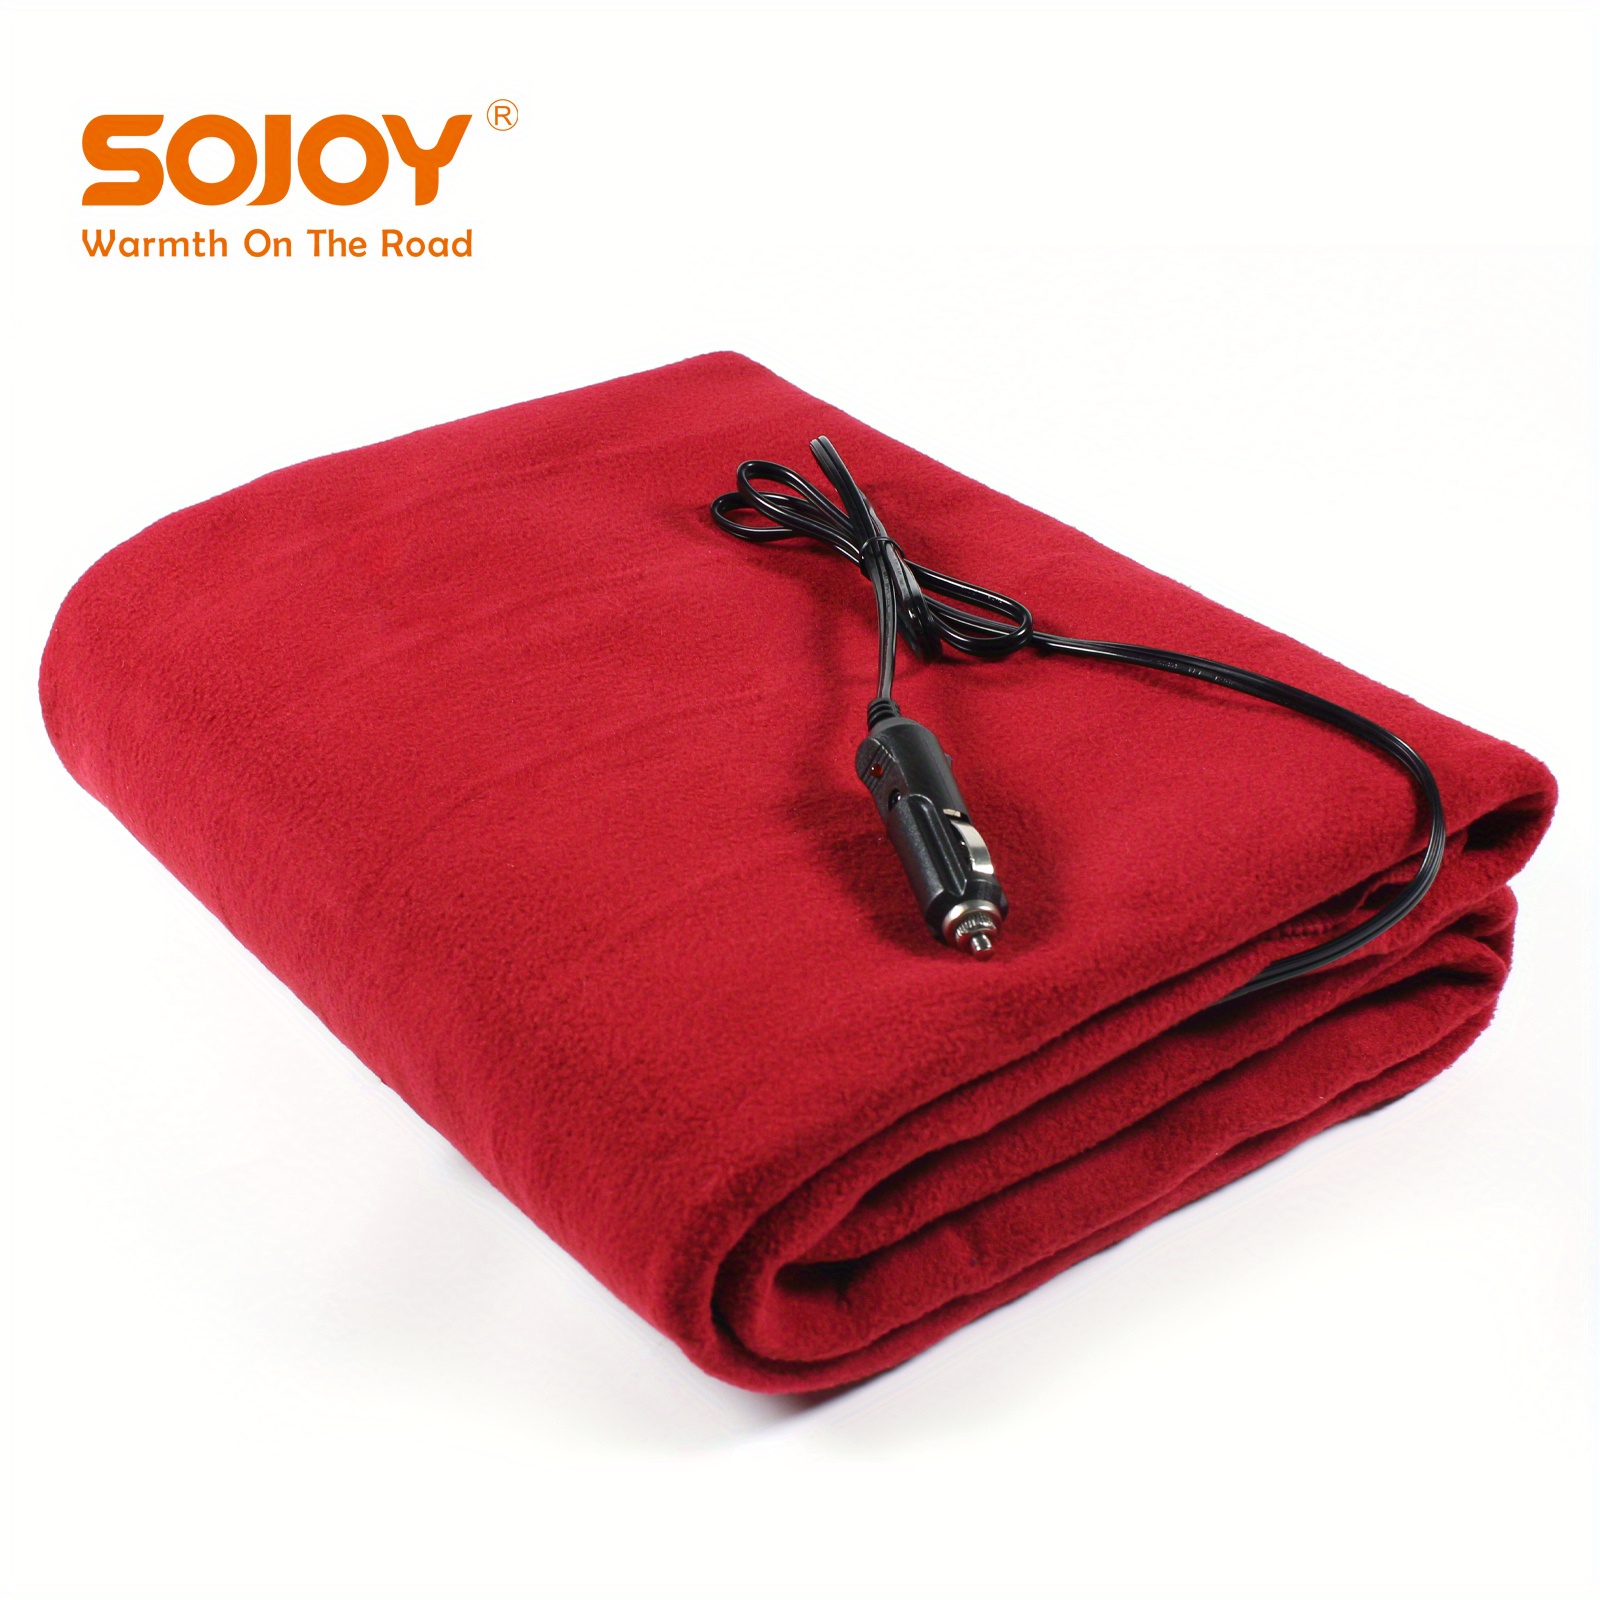 https://img.kwcdn.com/product/heated-red-blanket/d69d2f15w98k18-6b2439cf/1e133b30f5a/14e6719b-3588-4f77-98cb-7230b820cd63_1600x1600.jpeg